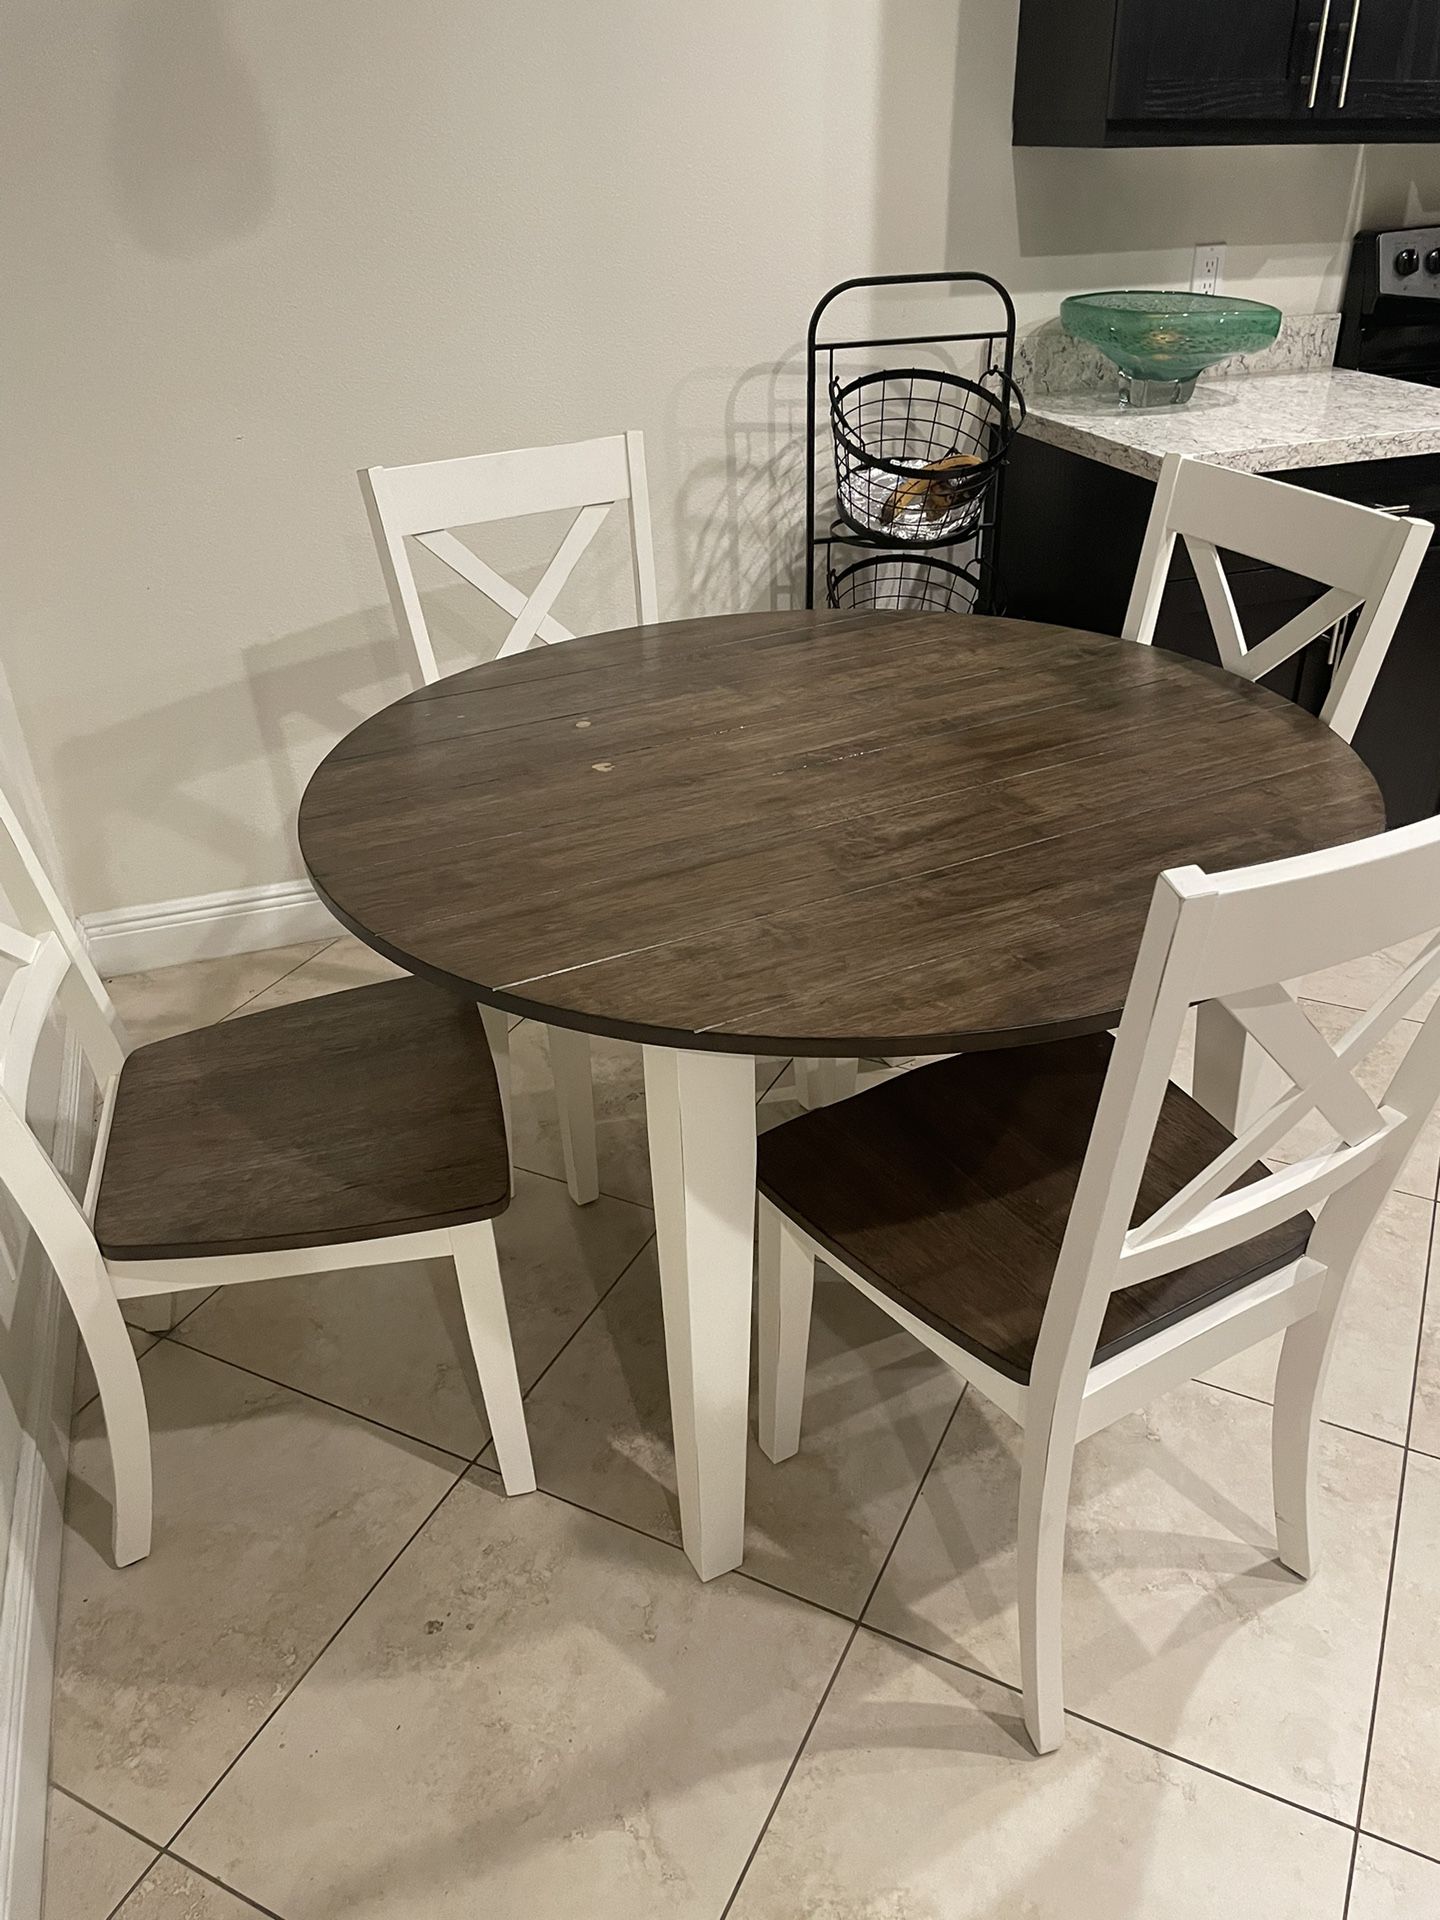 Brown Round Breakfast Table With 4 Chairs for $250